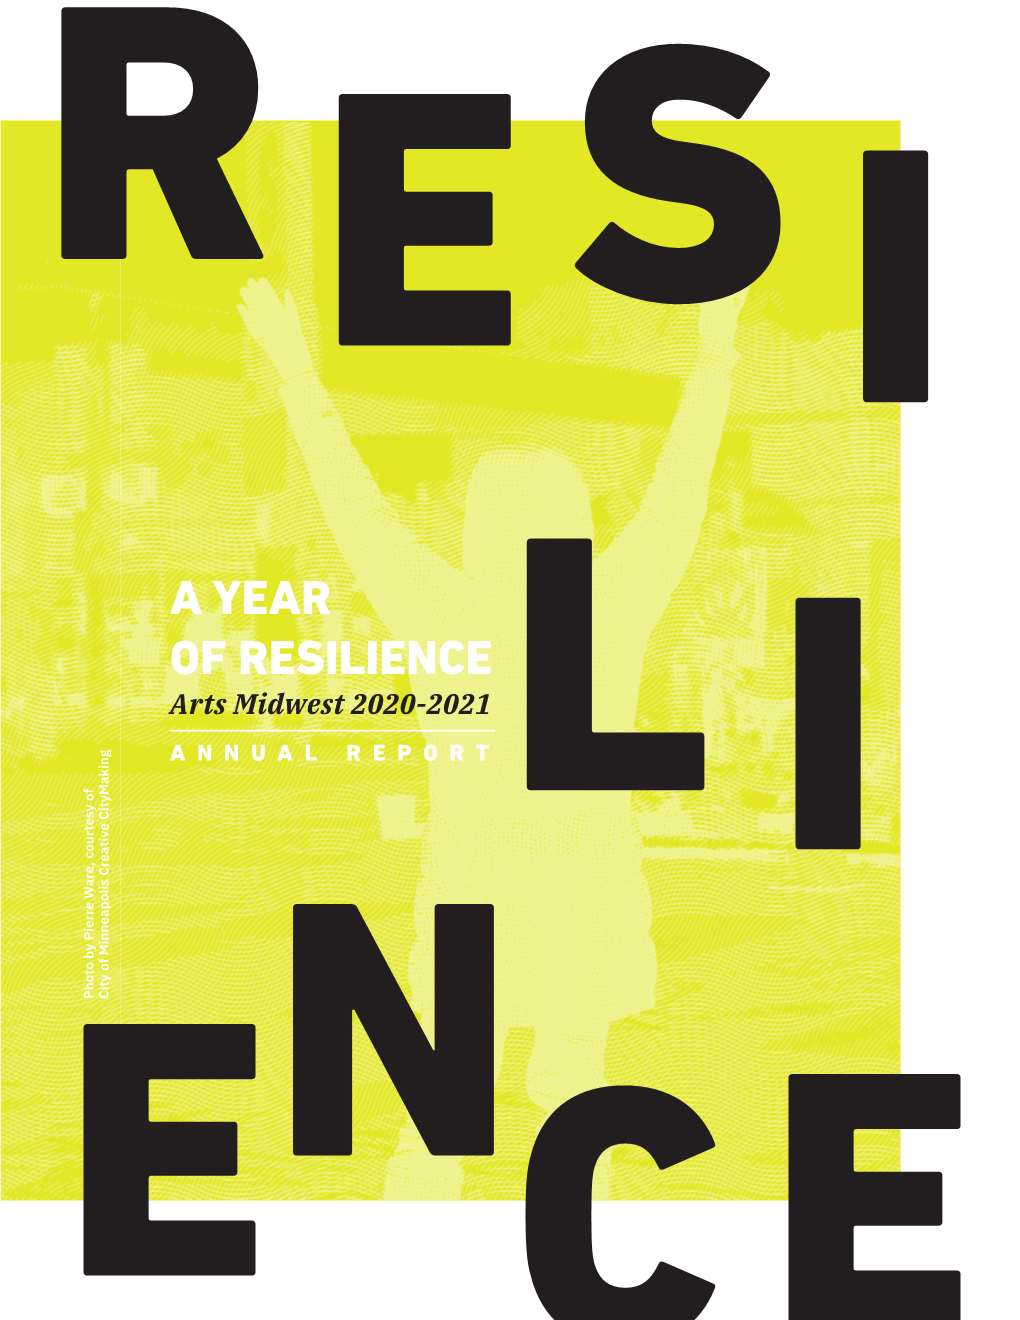 A YEAR of RESILIENCE Arts Midwest 2020-2021 ANNUAL REPORT